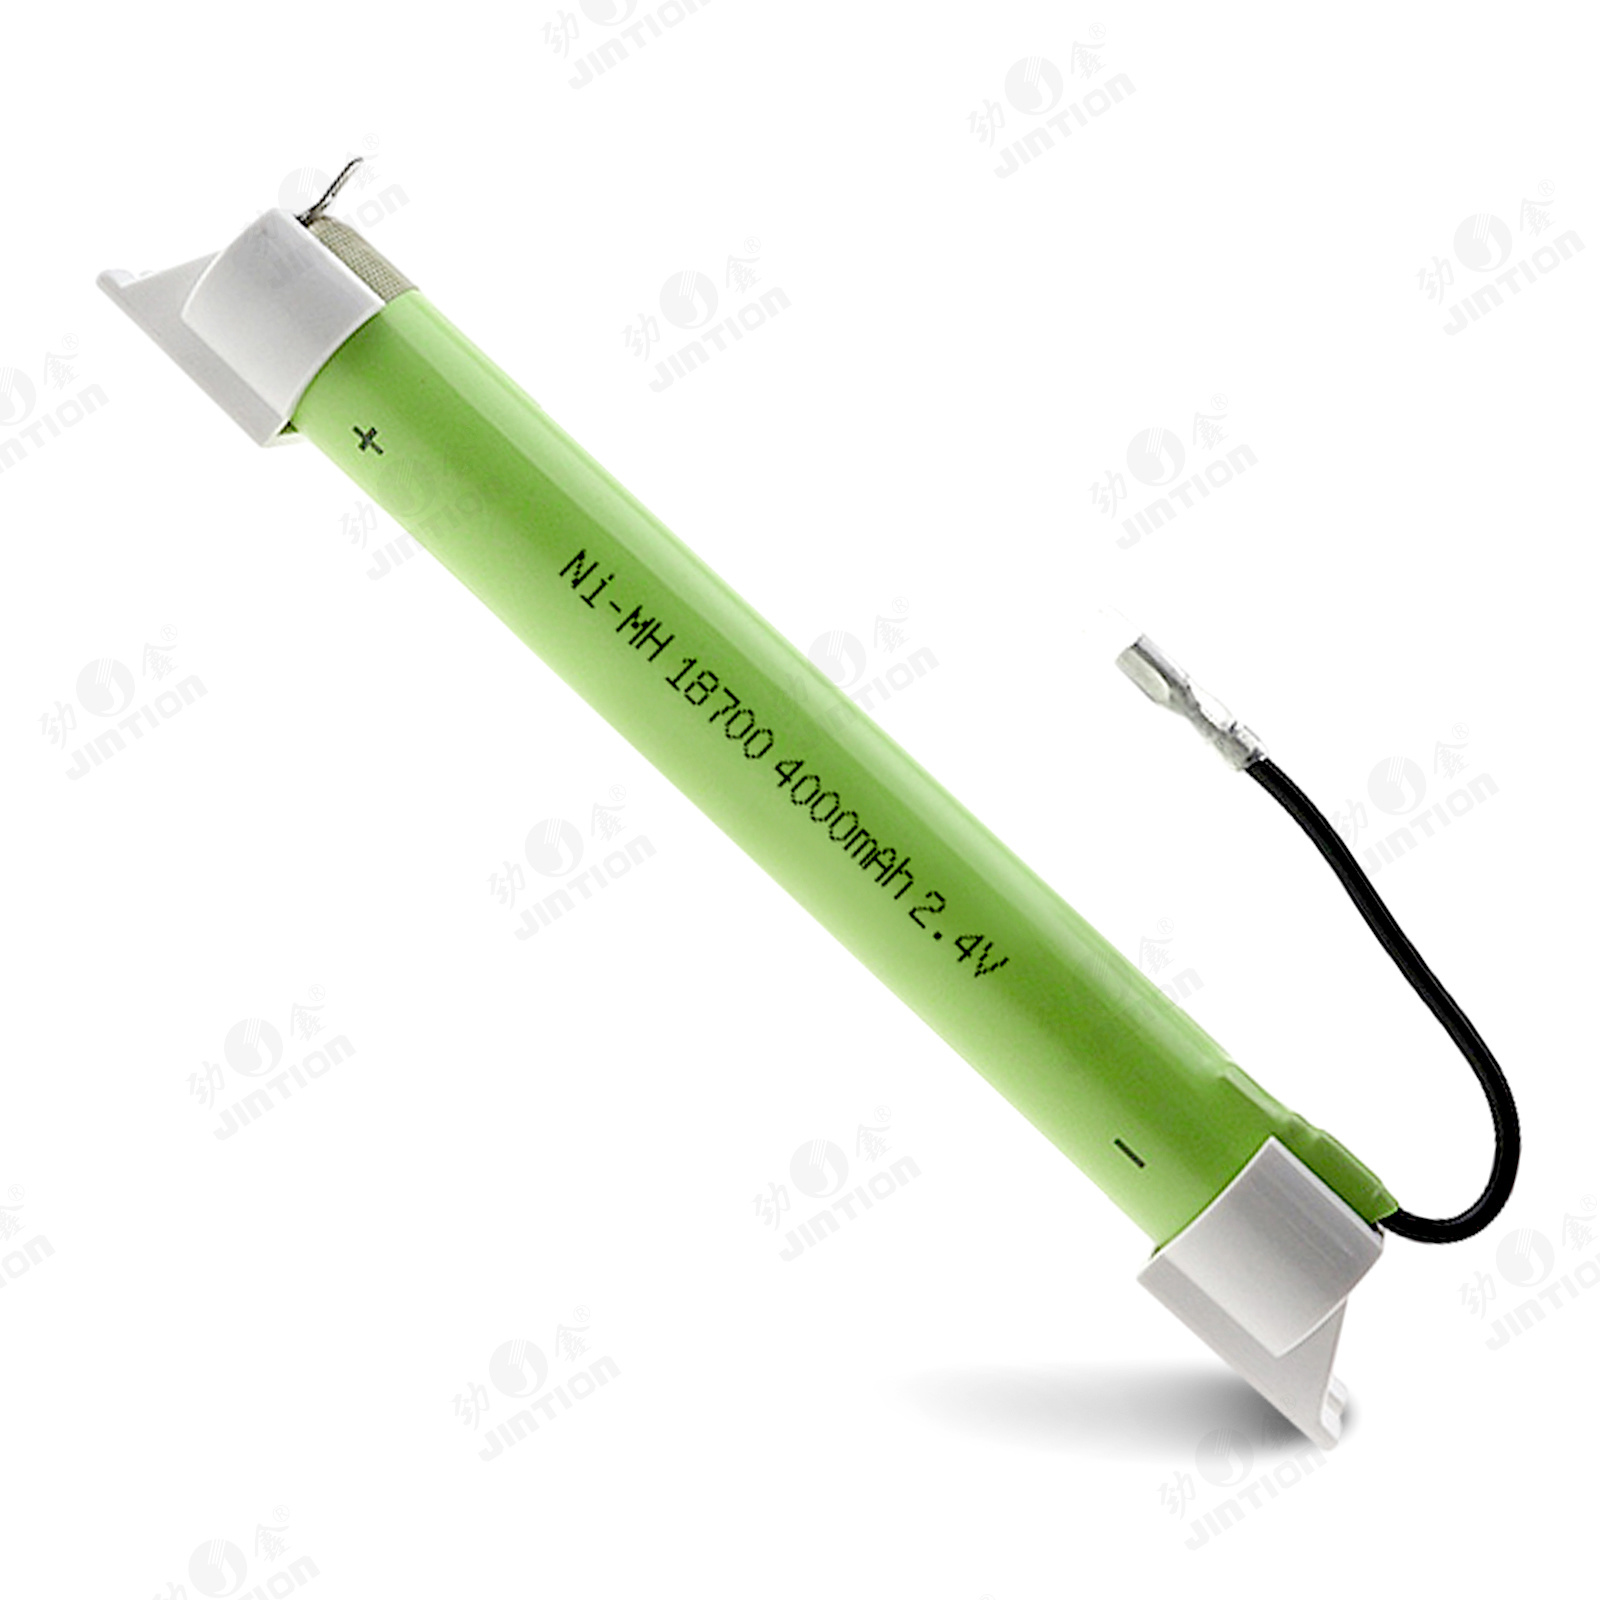 JINTION Nimh 18700 4000mAh 2.4v for Fire emergency lights High temperature nickel metal hydride battery 18700 rechargeable